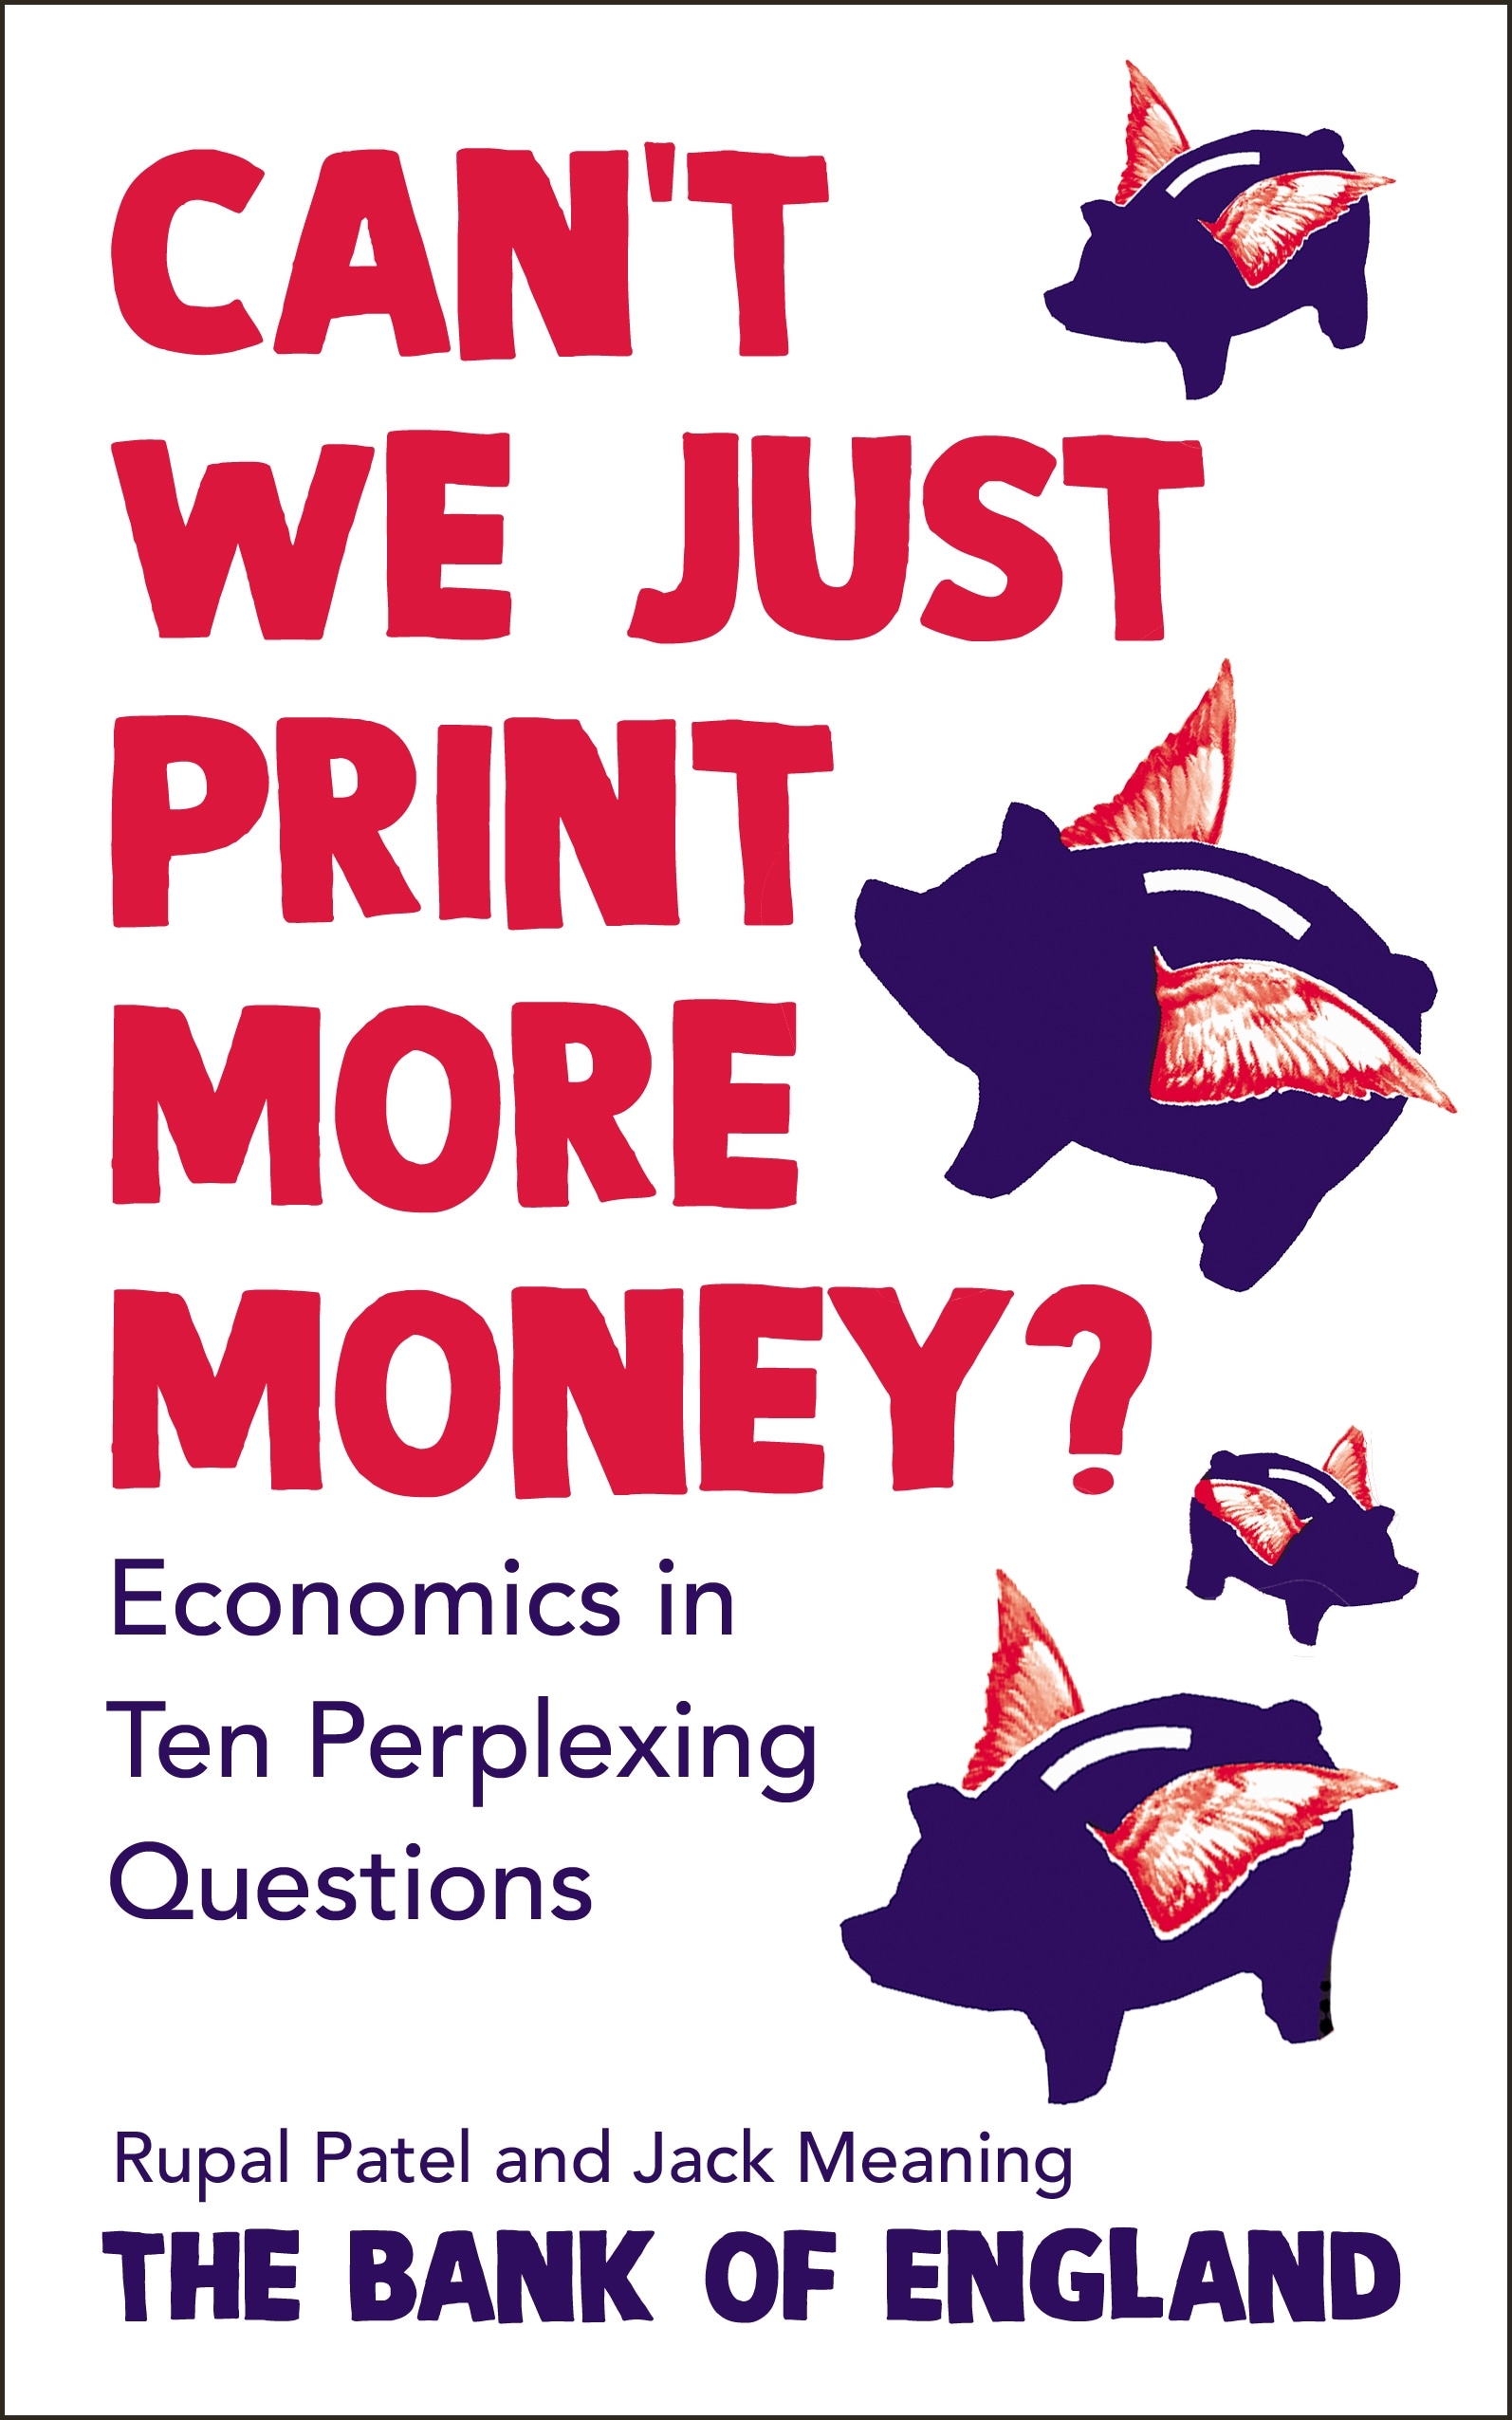 Book “Can’t We Just Print More Money?” by Rupal Patel — May 17, 2022